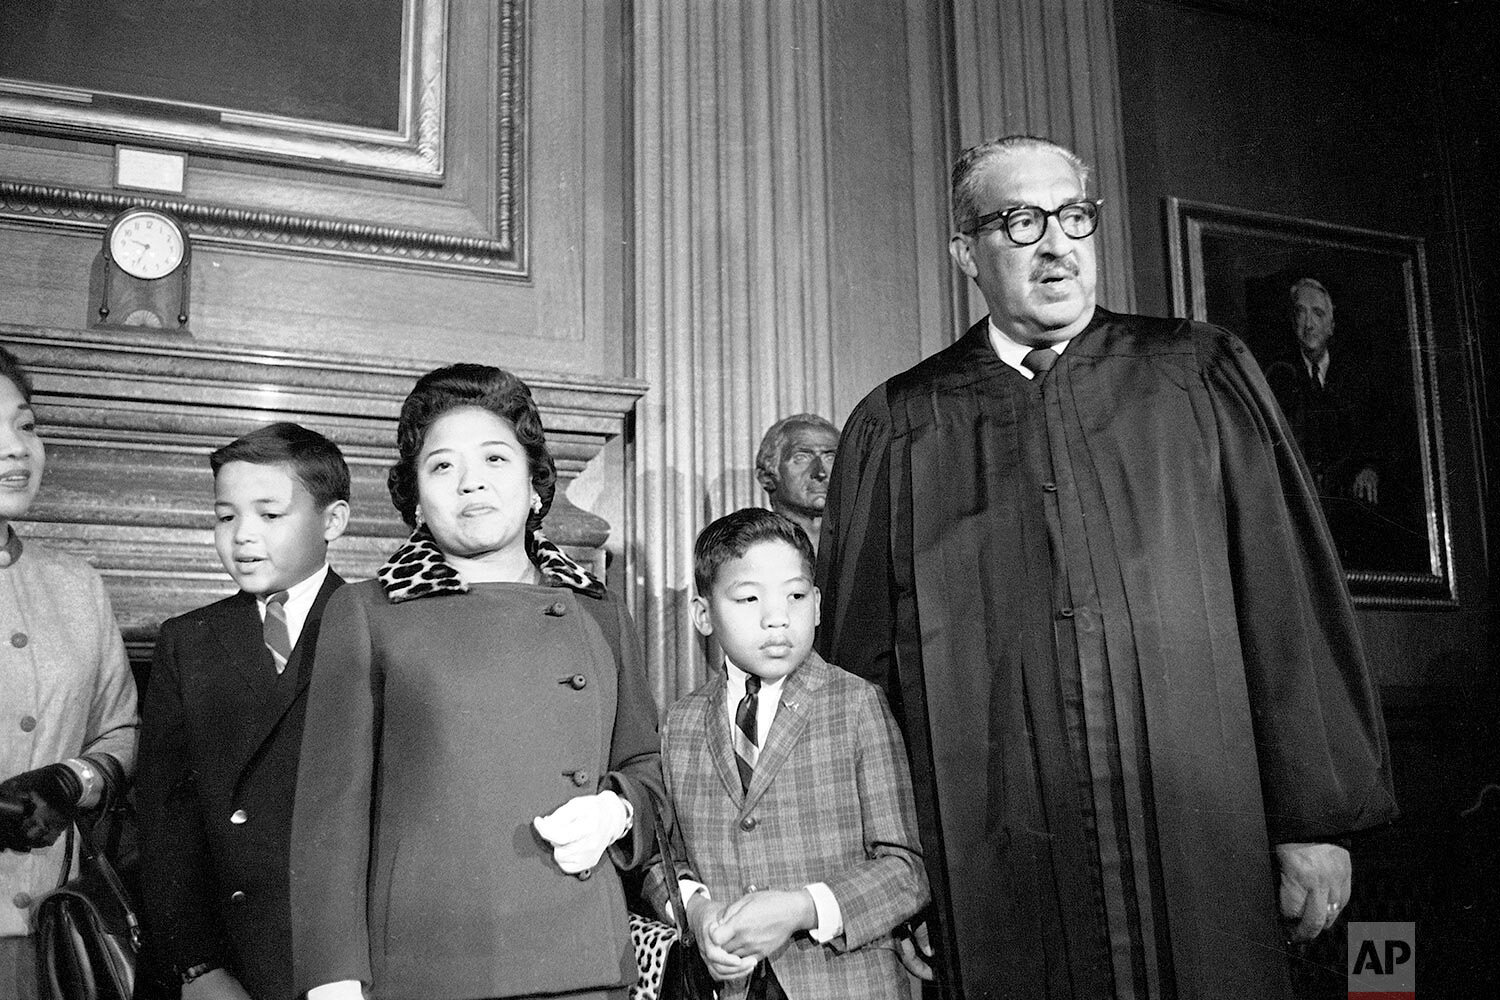  Supreme Court Justice Thurgood Marshall's family is at hand to watch him take his seat at the court for the first time, Oct. 2, 1967.  From left to right: sons Thurgood, Jr., 11, John, 9, wife Cecilia Suyat, and the Justice.  (AP Photo/Henry Griffin